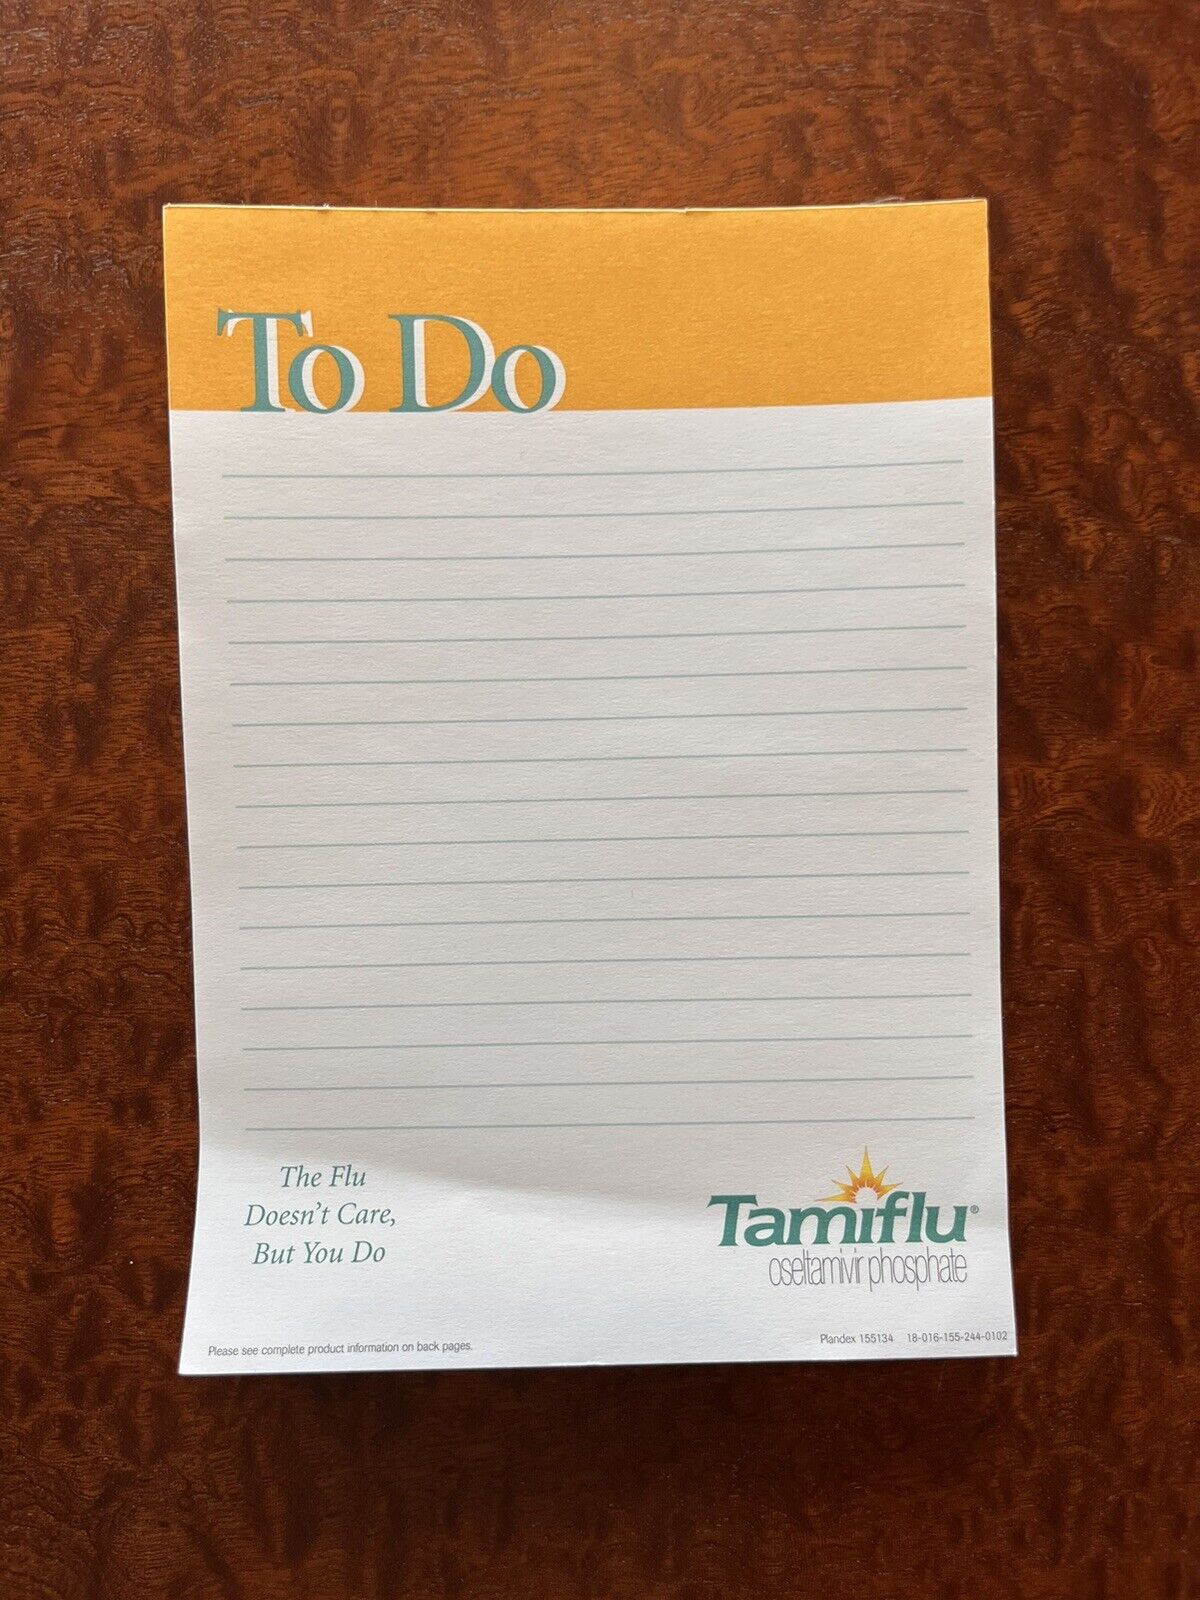 Medical Drug Rep Collectible Notepad Lined Rx Pharmaceutical Tamiflu 7”x5”